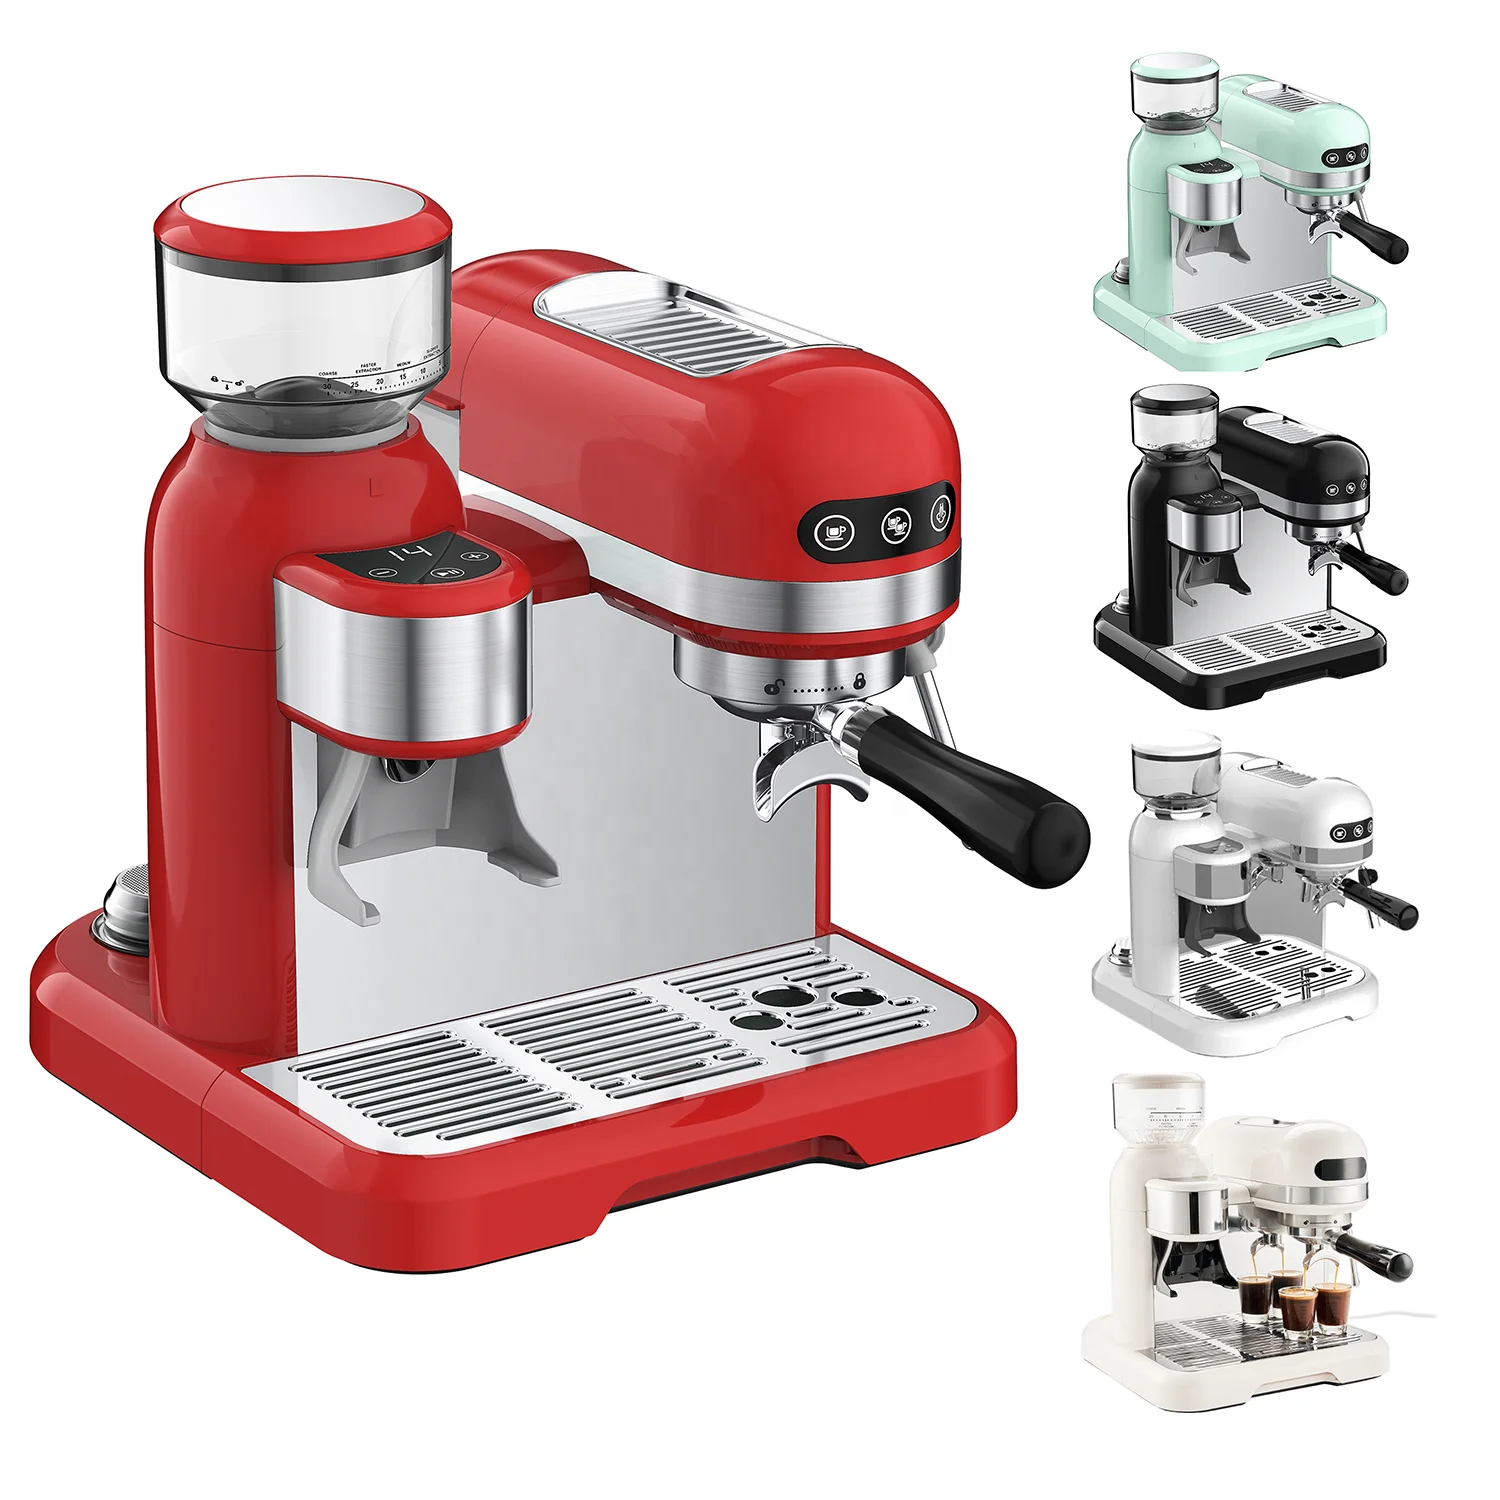 

Espresso Coffee Maker Machine Multi 3 in1 Express Cappuccino Commercial Restaurant Office Cafe Coffee Machine With Grinder